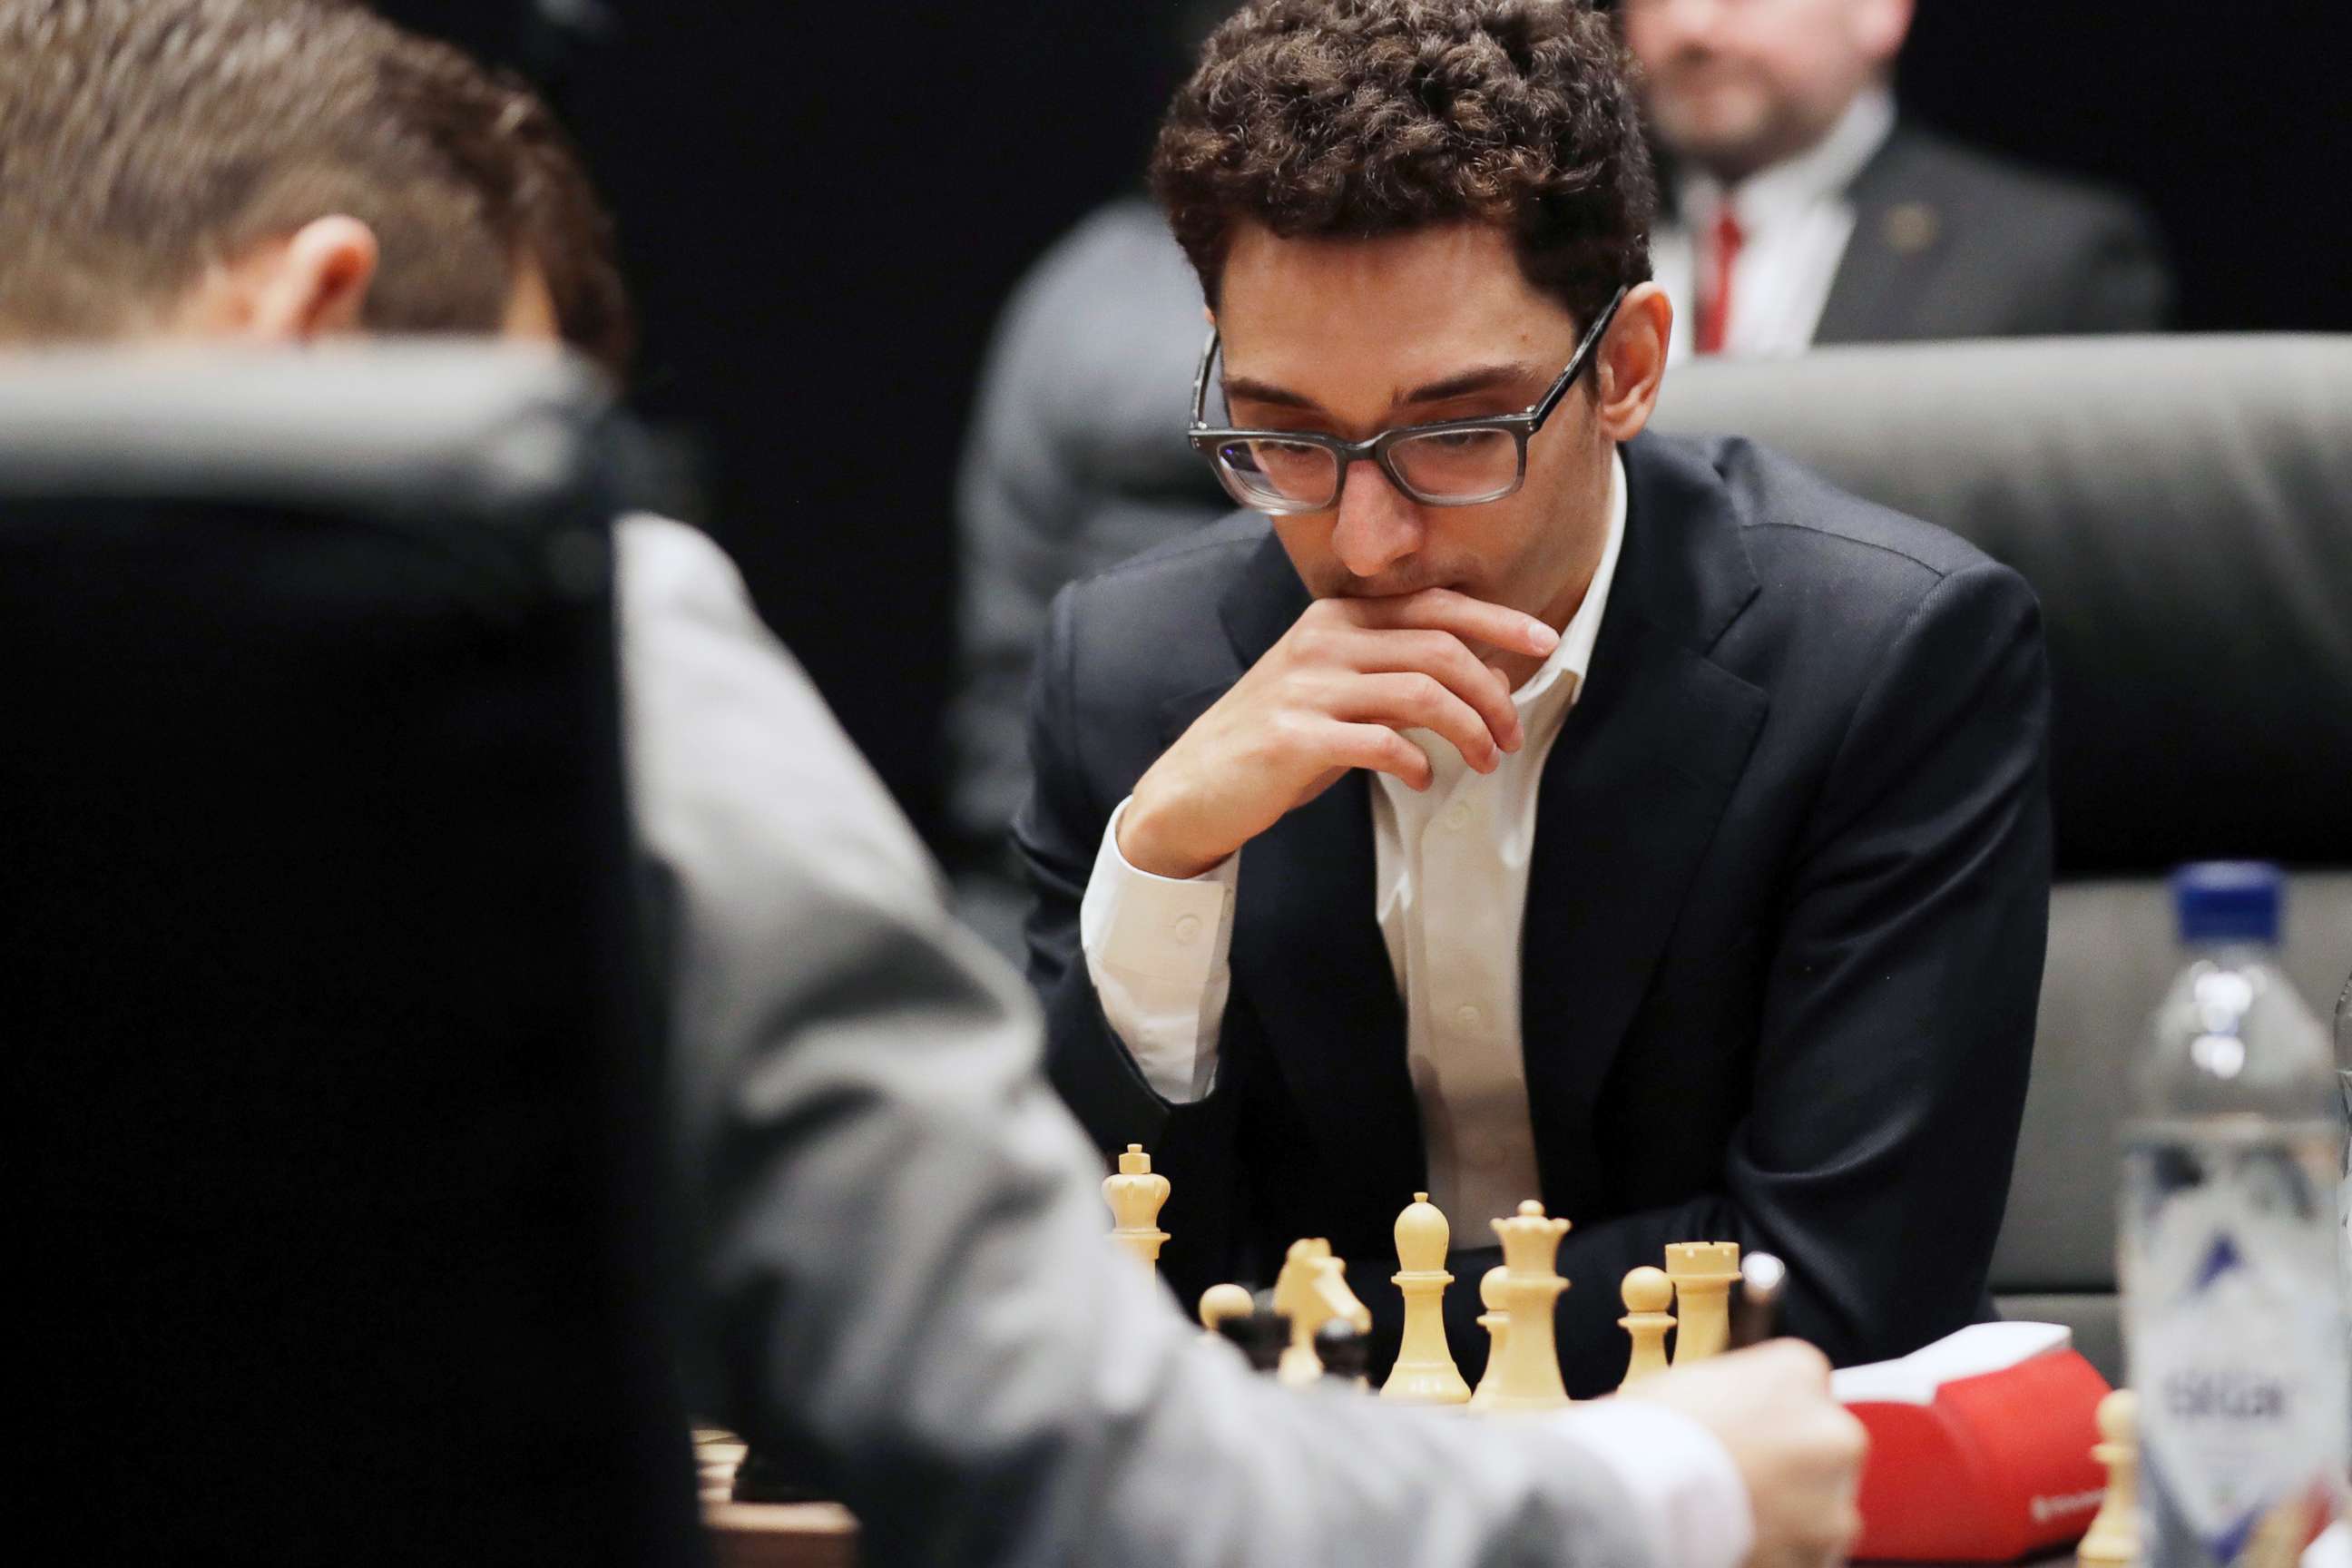 PHOTO: Italian-American challenger Fabiano Caruana plays reigning chess world champion Magnus Carlsen, left, from Norway, in the first few minutes of round 12 of their World Chess Championship Match in London, Nov. 26, 2018.